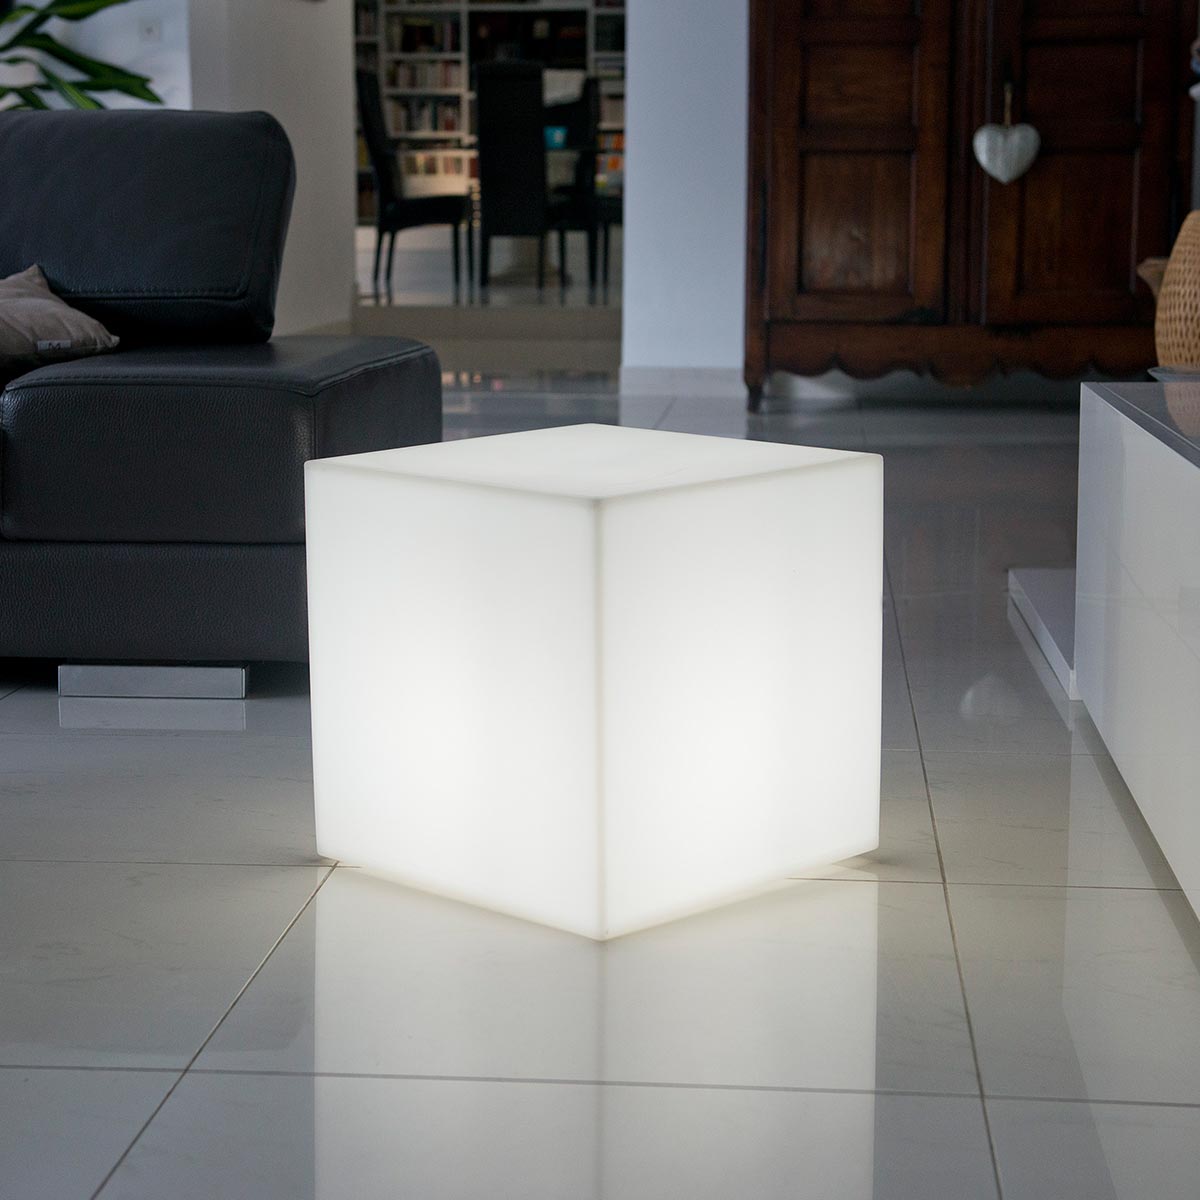 Cube lumineux filaire carry